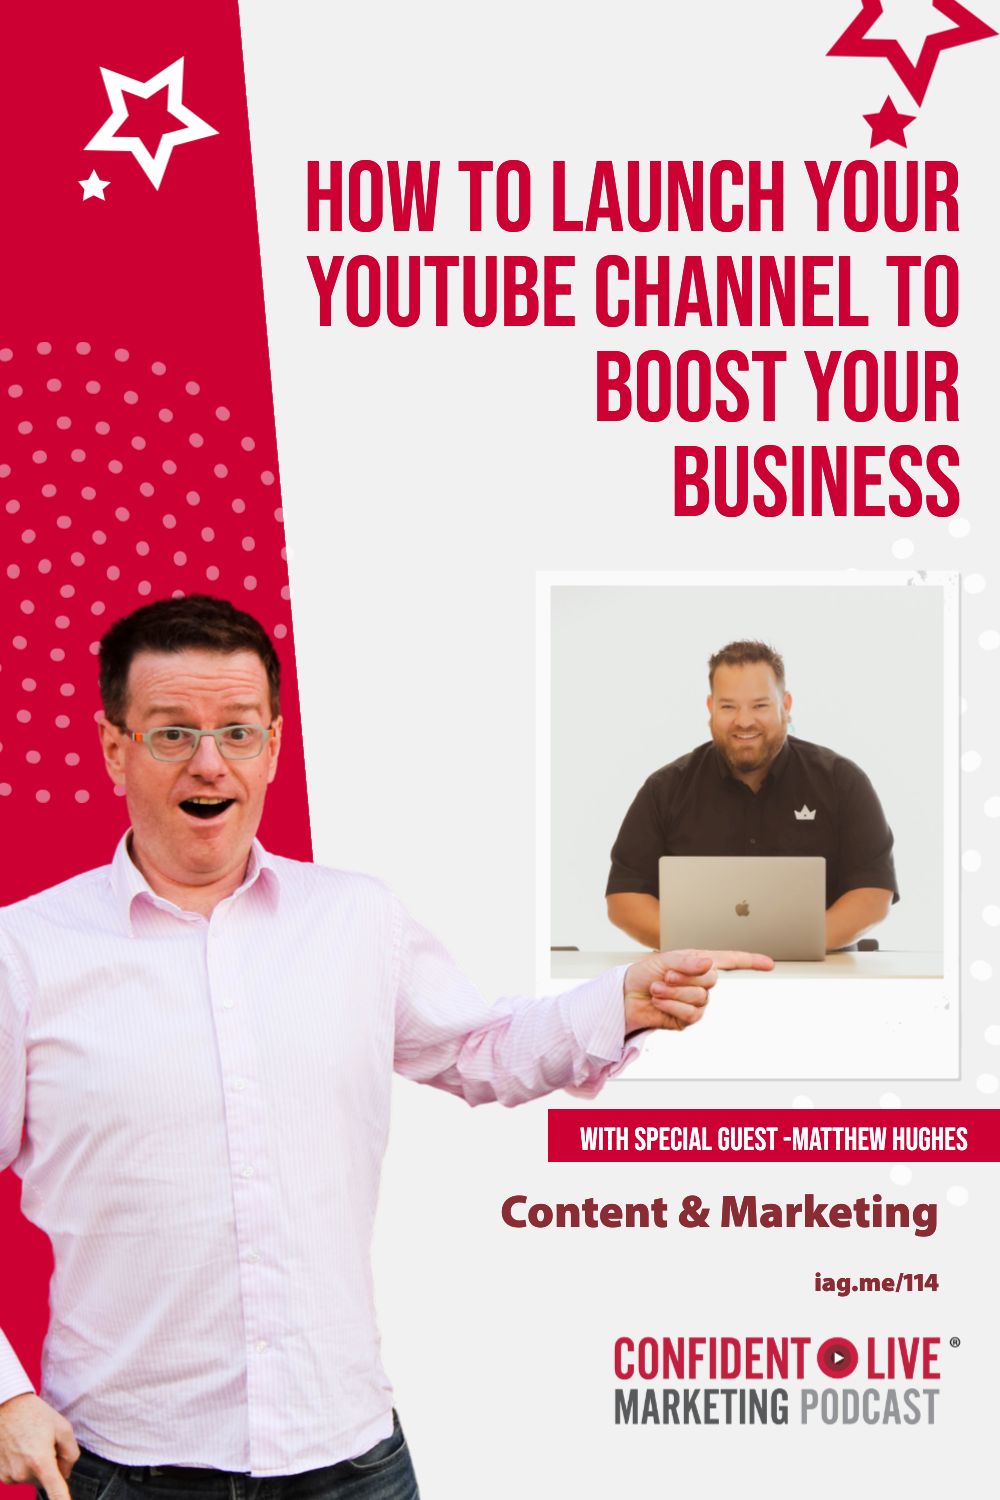 How To Launch Your YouTube Channel To Boost Your Business